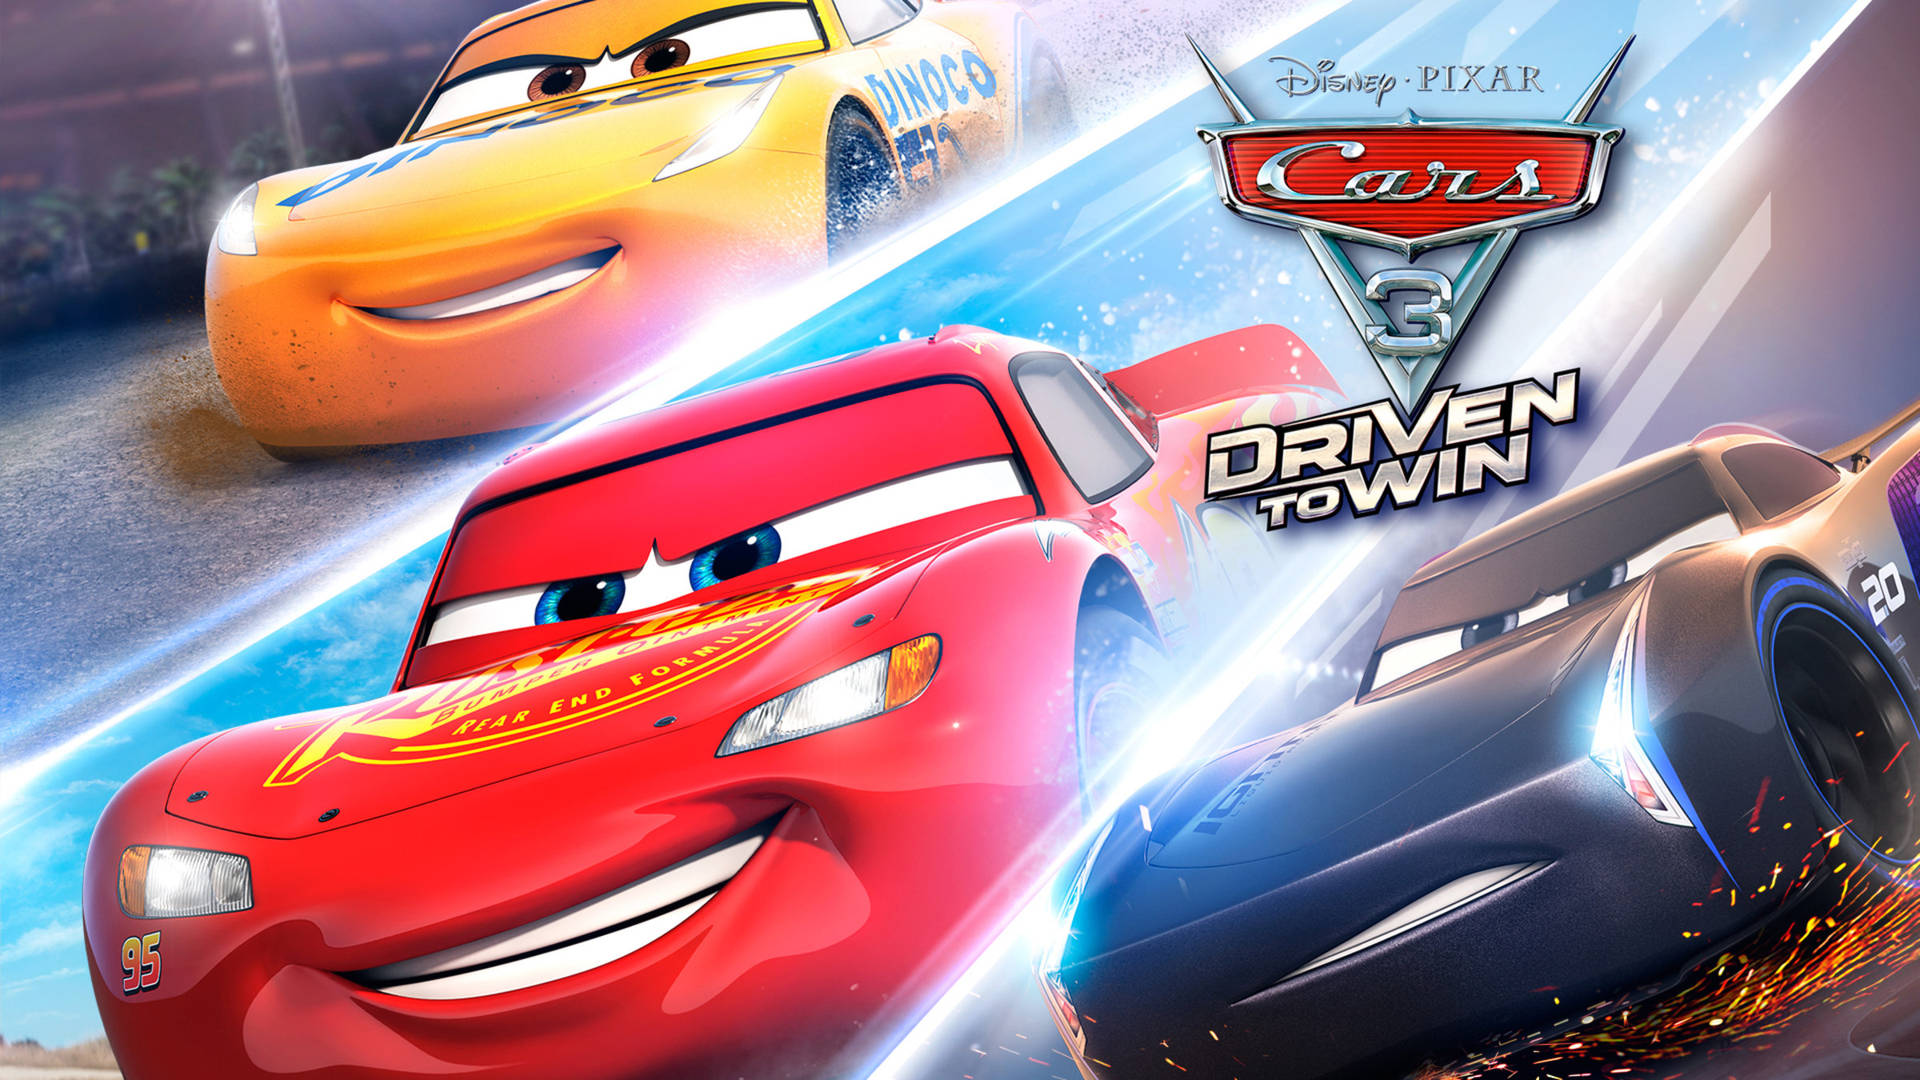 Cars 3 Driven To Win Wallpaper